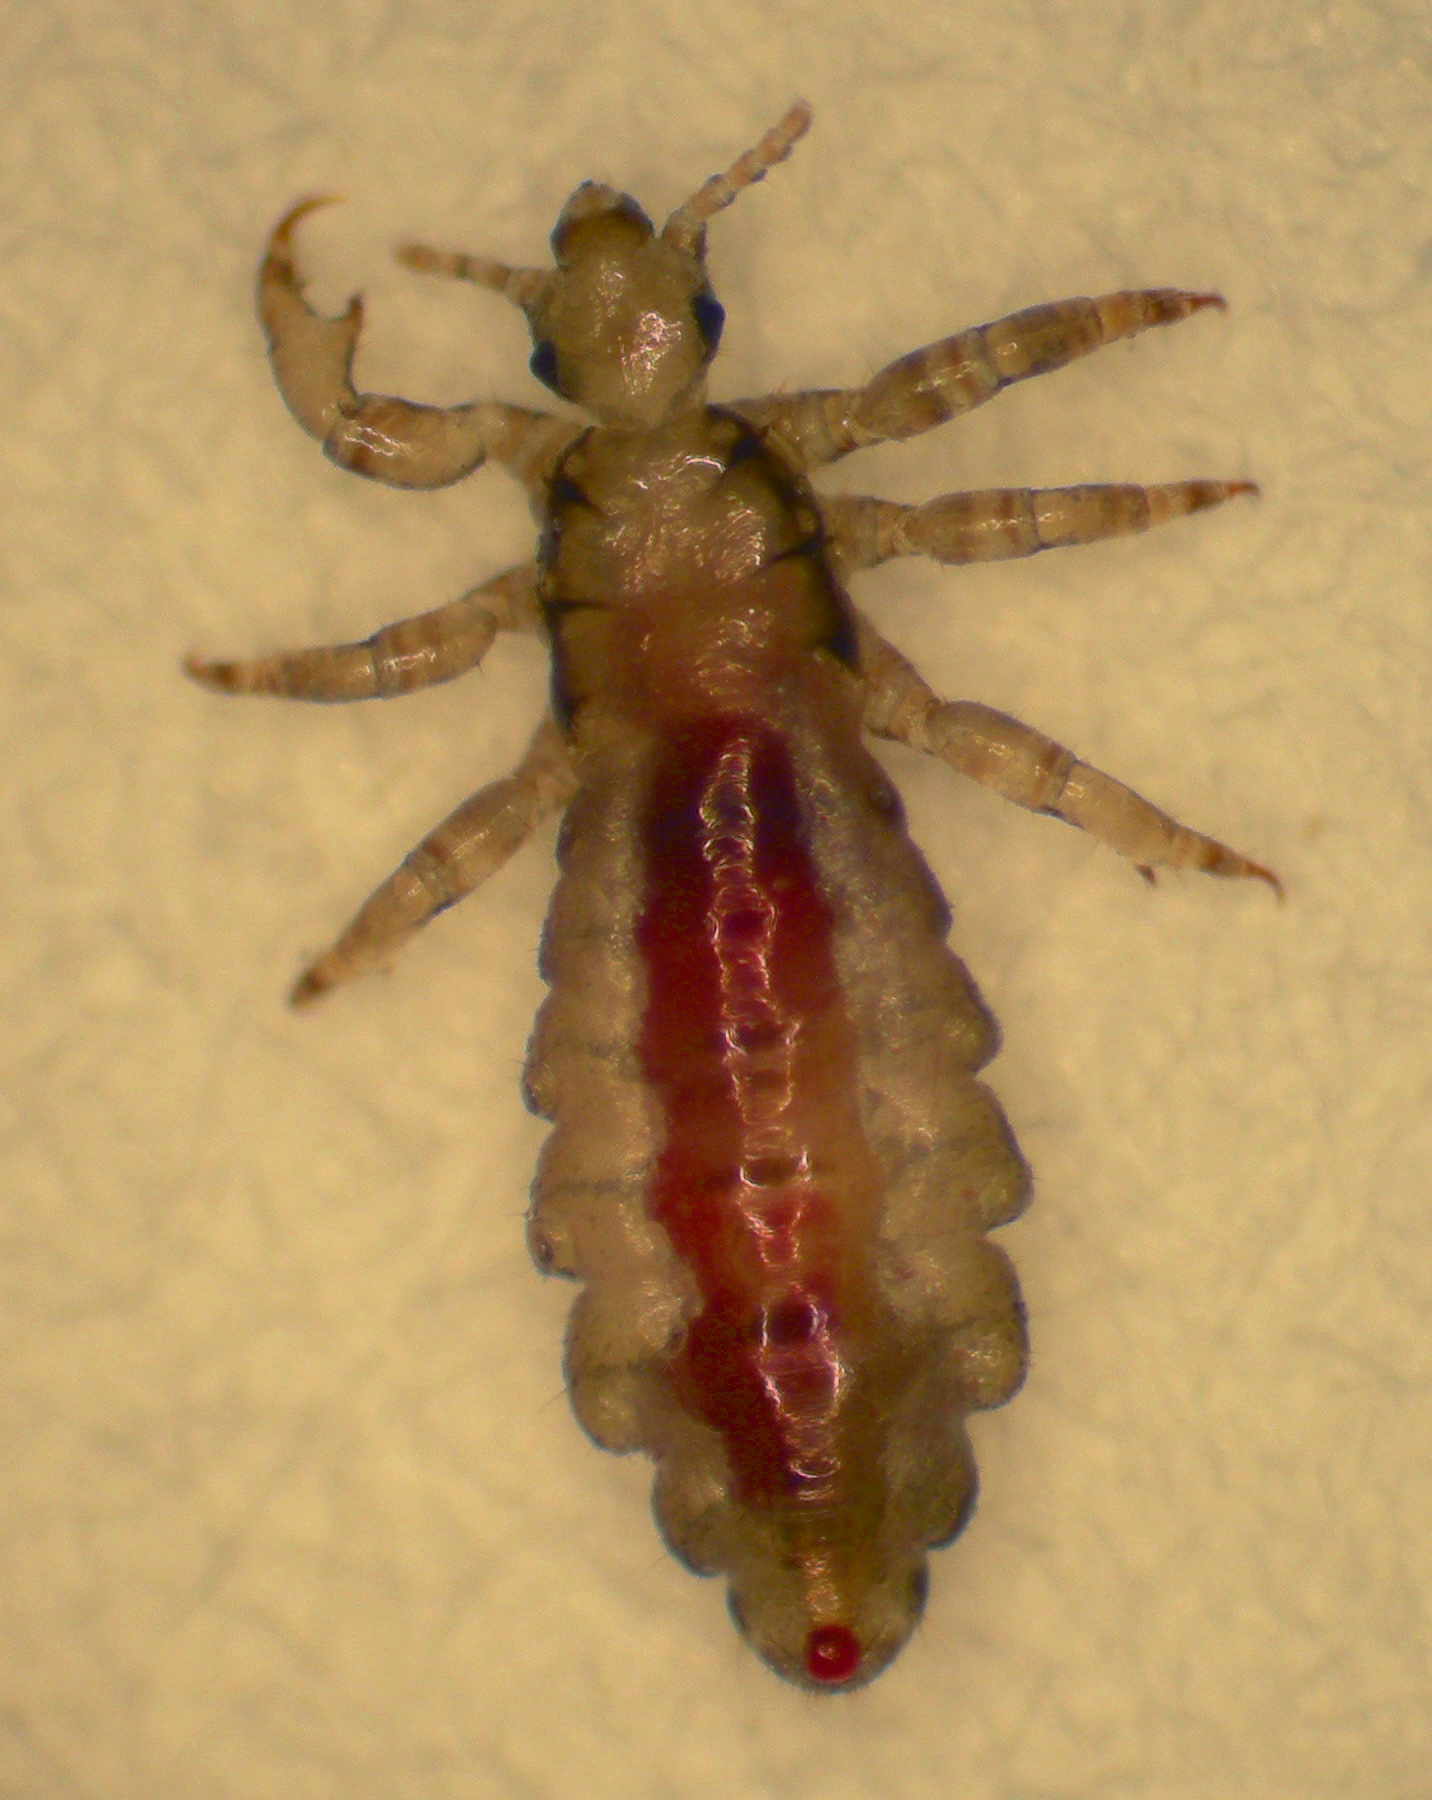 A blood-engorged head louse of the sort that plagues many children and their families. University of Utah biologists developed chemical-free, warm-air device called the LouseBuster, which kills hatched lice and their eggs, according to a new study. The LouseBuster now is on the market after gaining government clearance.